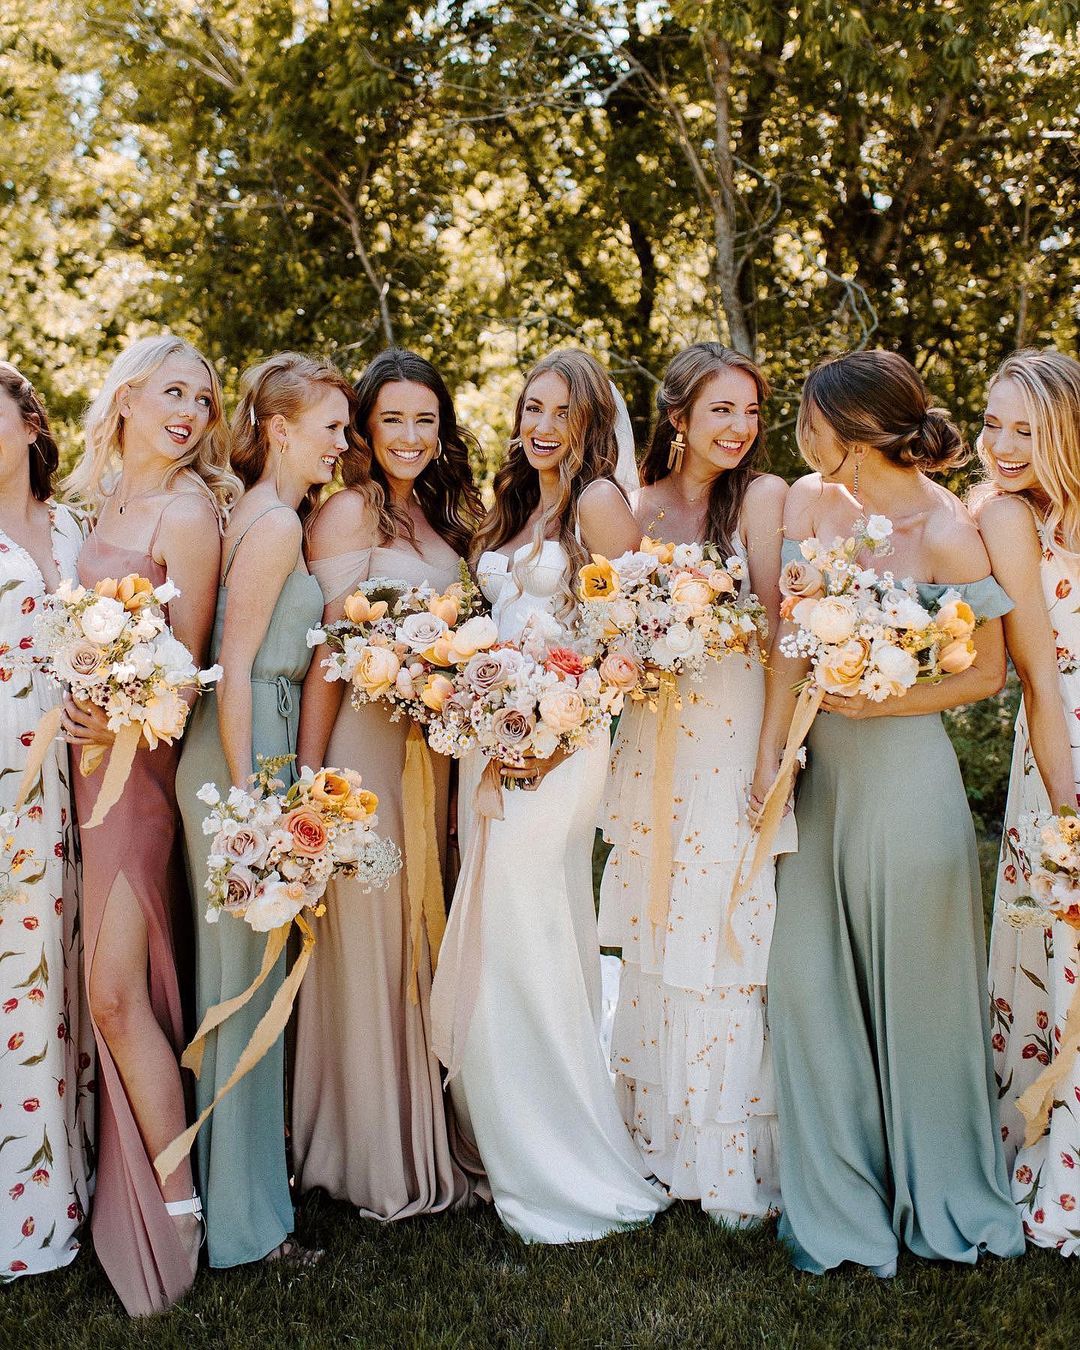 Check Out the New Bridesmaid Dresses and Wedding Accessories Vera Wang  Designed for David's Bridal, Because I'm ALL About One-Stop Shopping |  Glamour